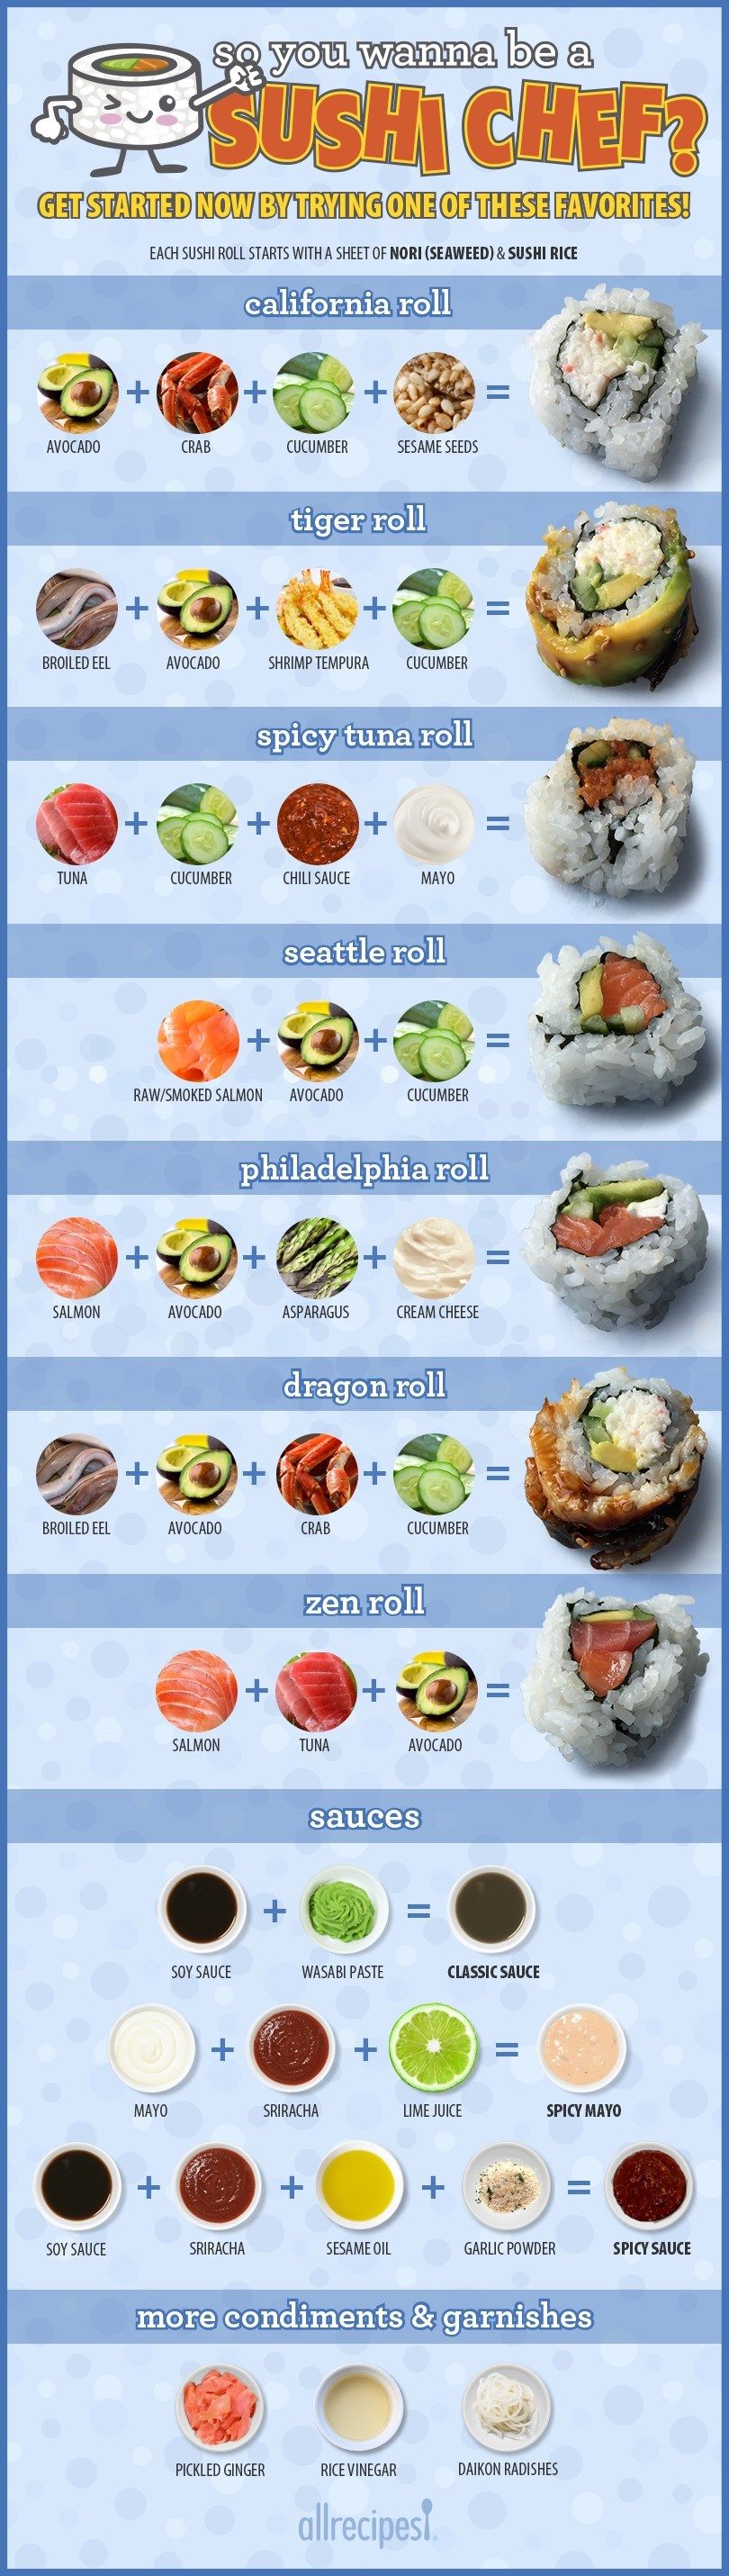 How to Make Your Own Sushi Rolls